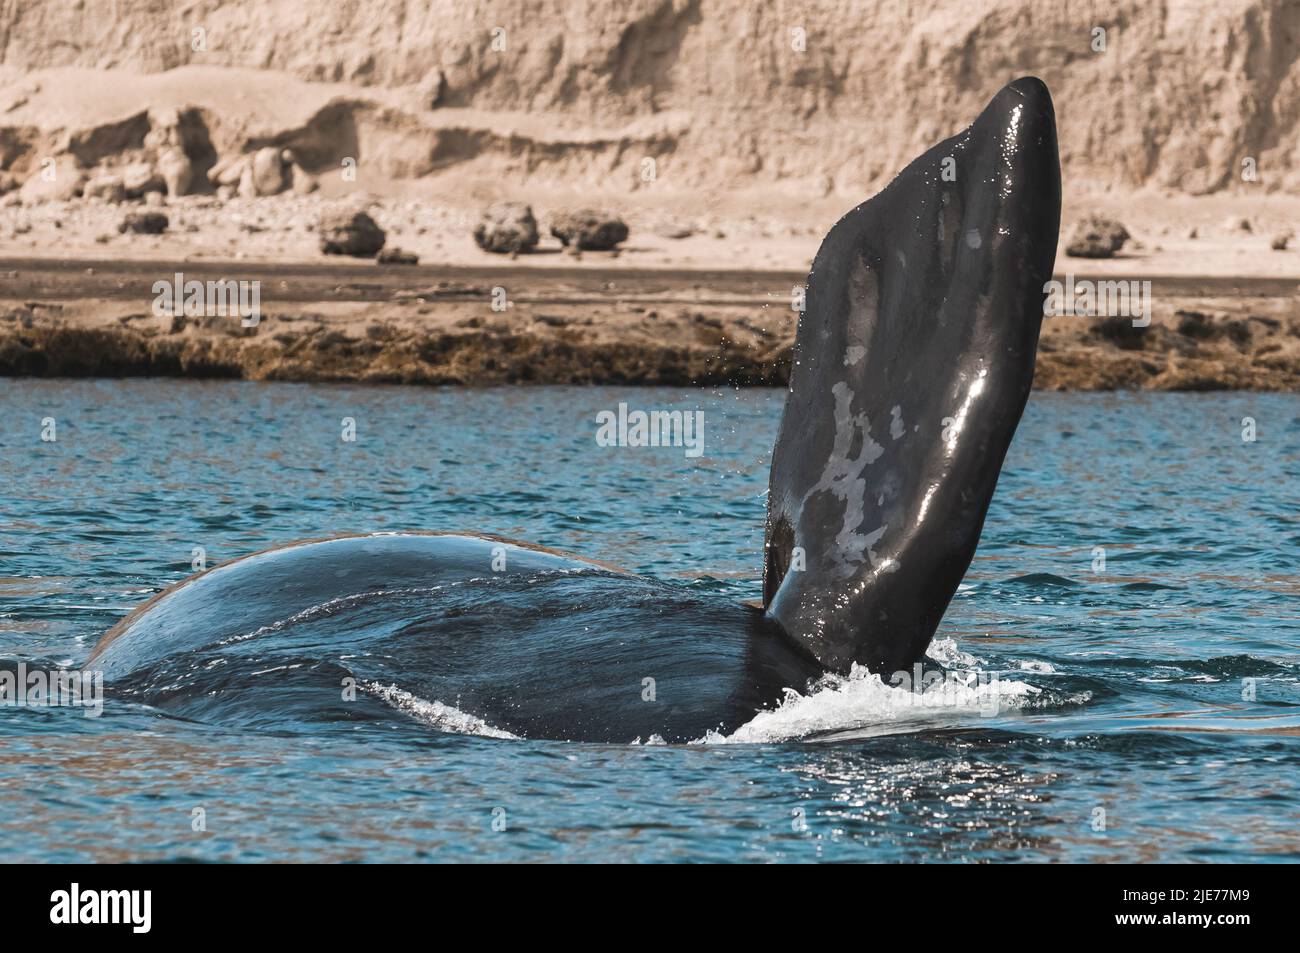 Southern right Whale, Peninsula Valdes, Unesco World Heritage Site, Patagonia, Argentina. Stock Photo